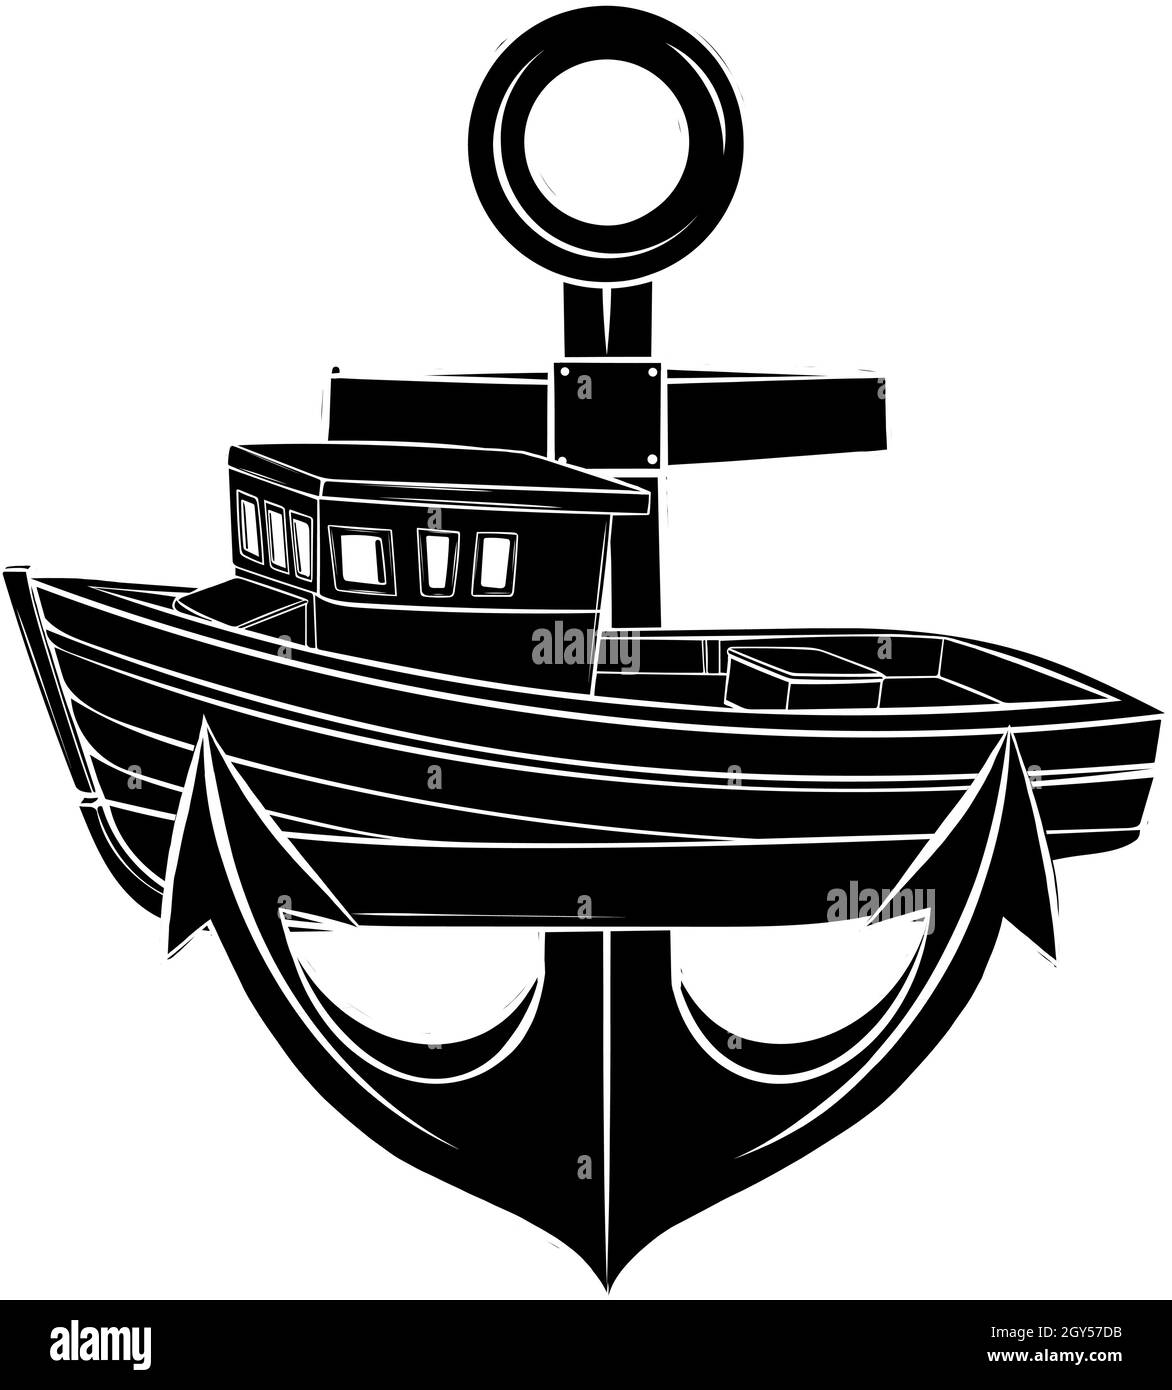 Vector silhouette of fishing boat with anchor Stock Vector